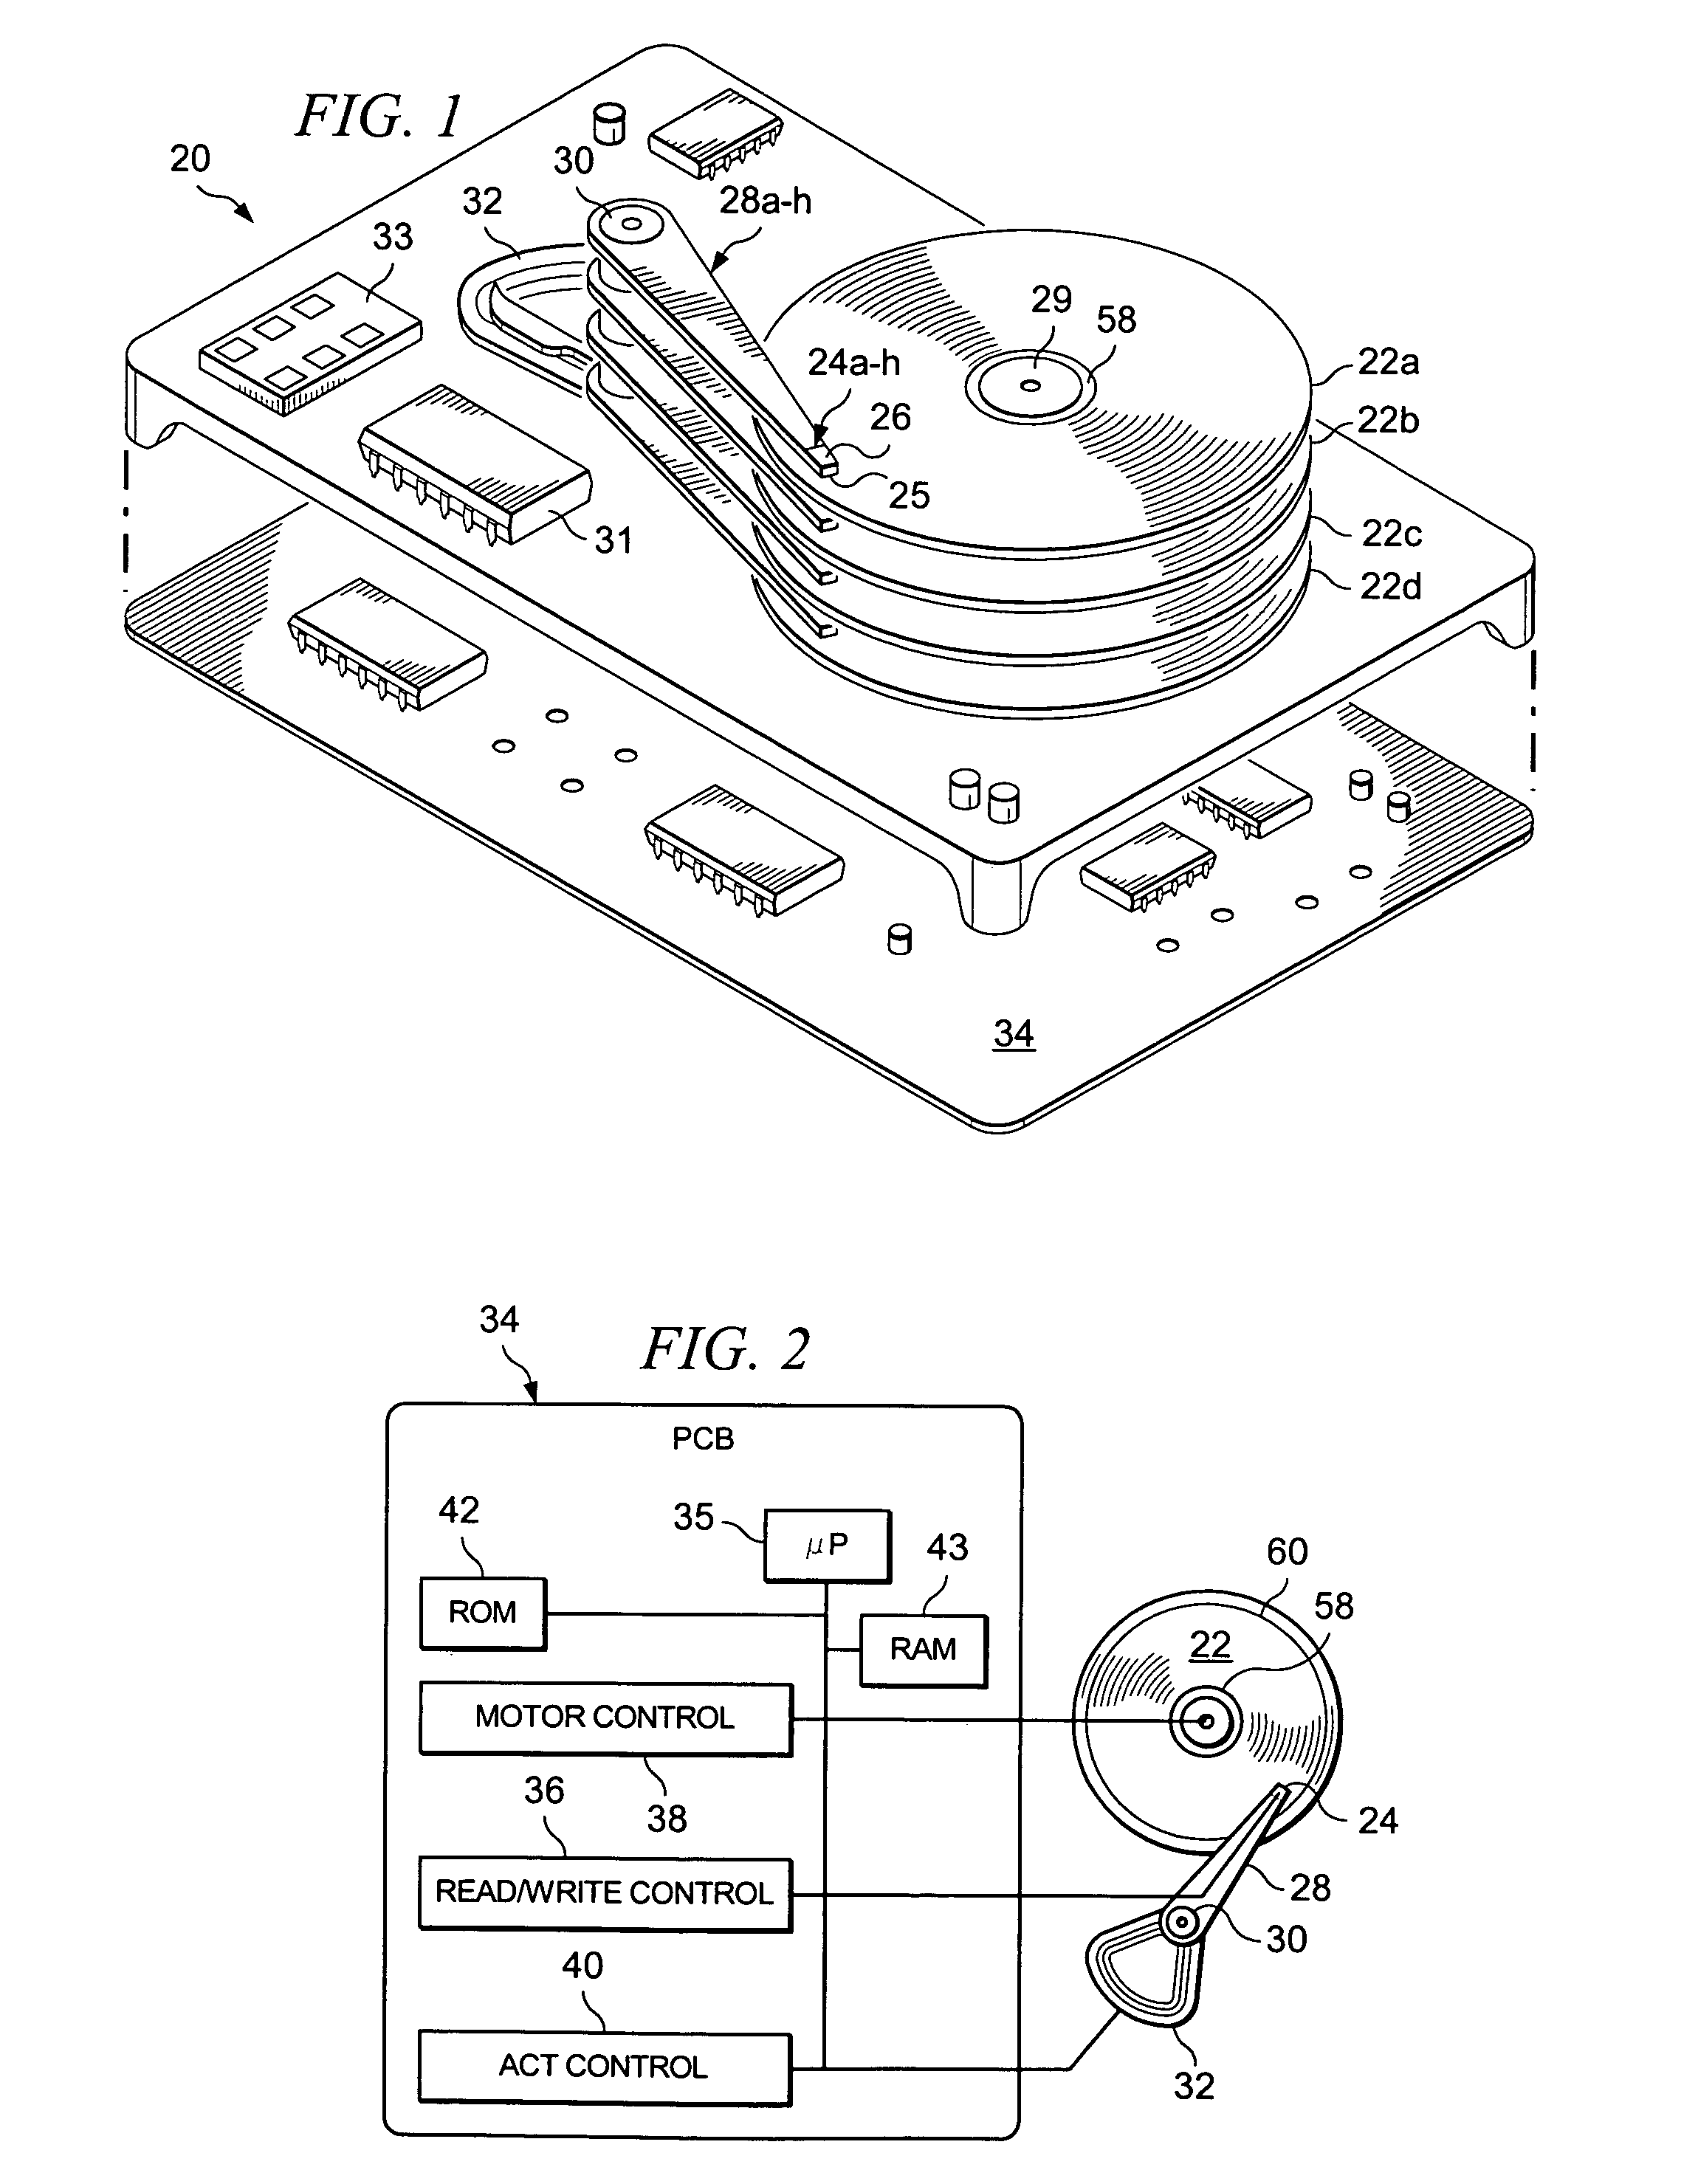 Non-consecutive transitional mechanism for seek operations when transitioning from a seek control to a track following control